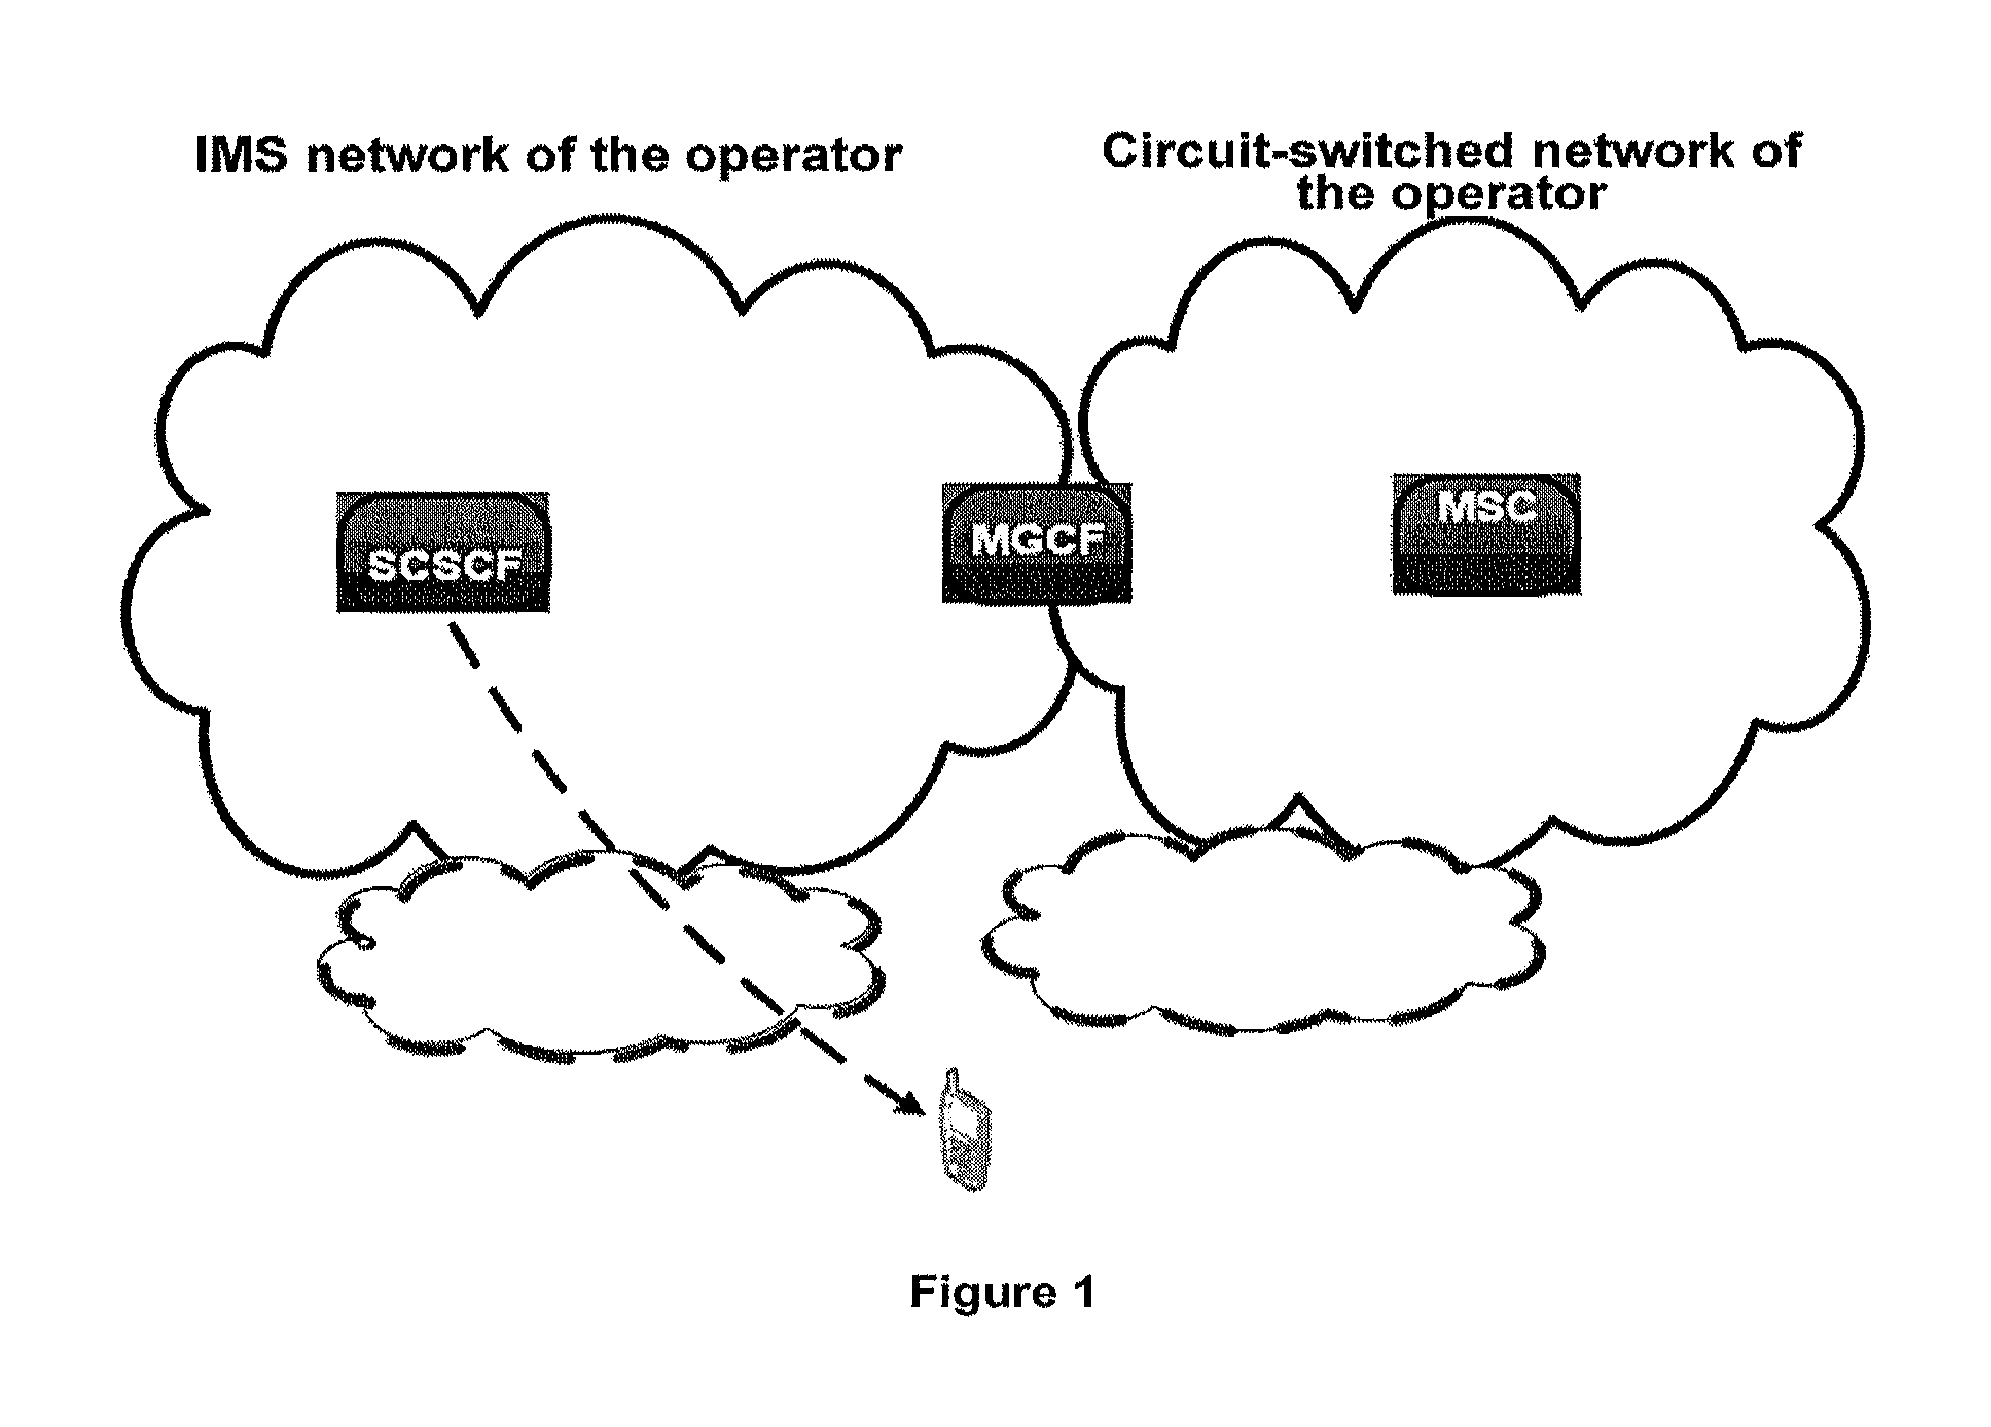 Method and system for the improvement of routing in communications networks providing multimedia services over IMS networks